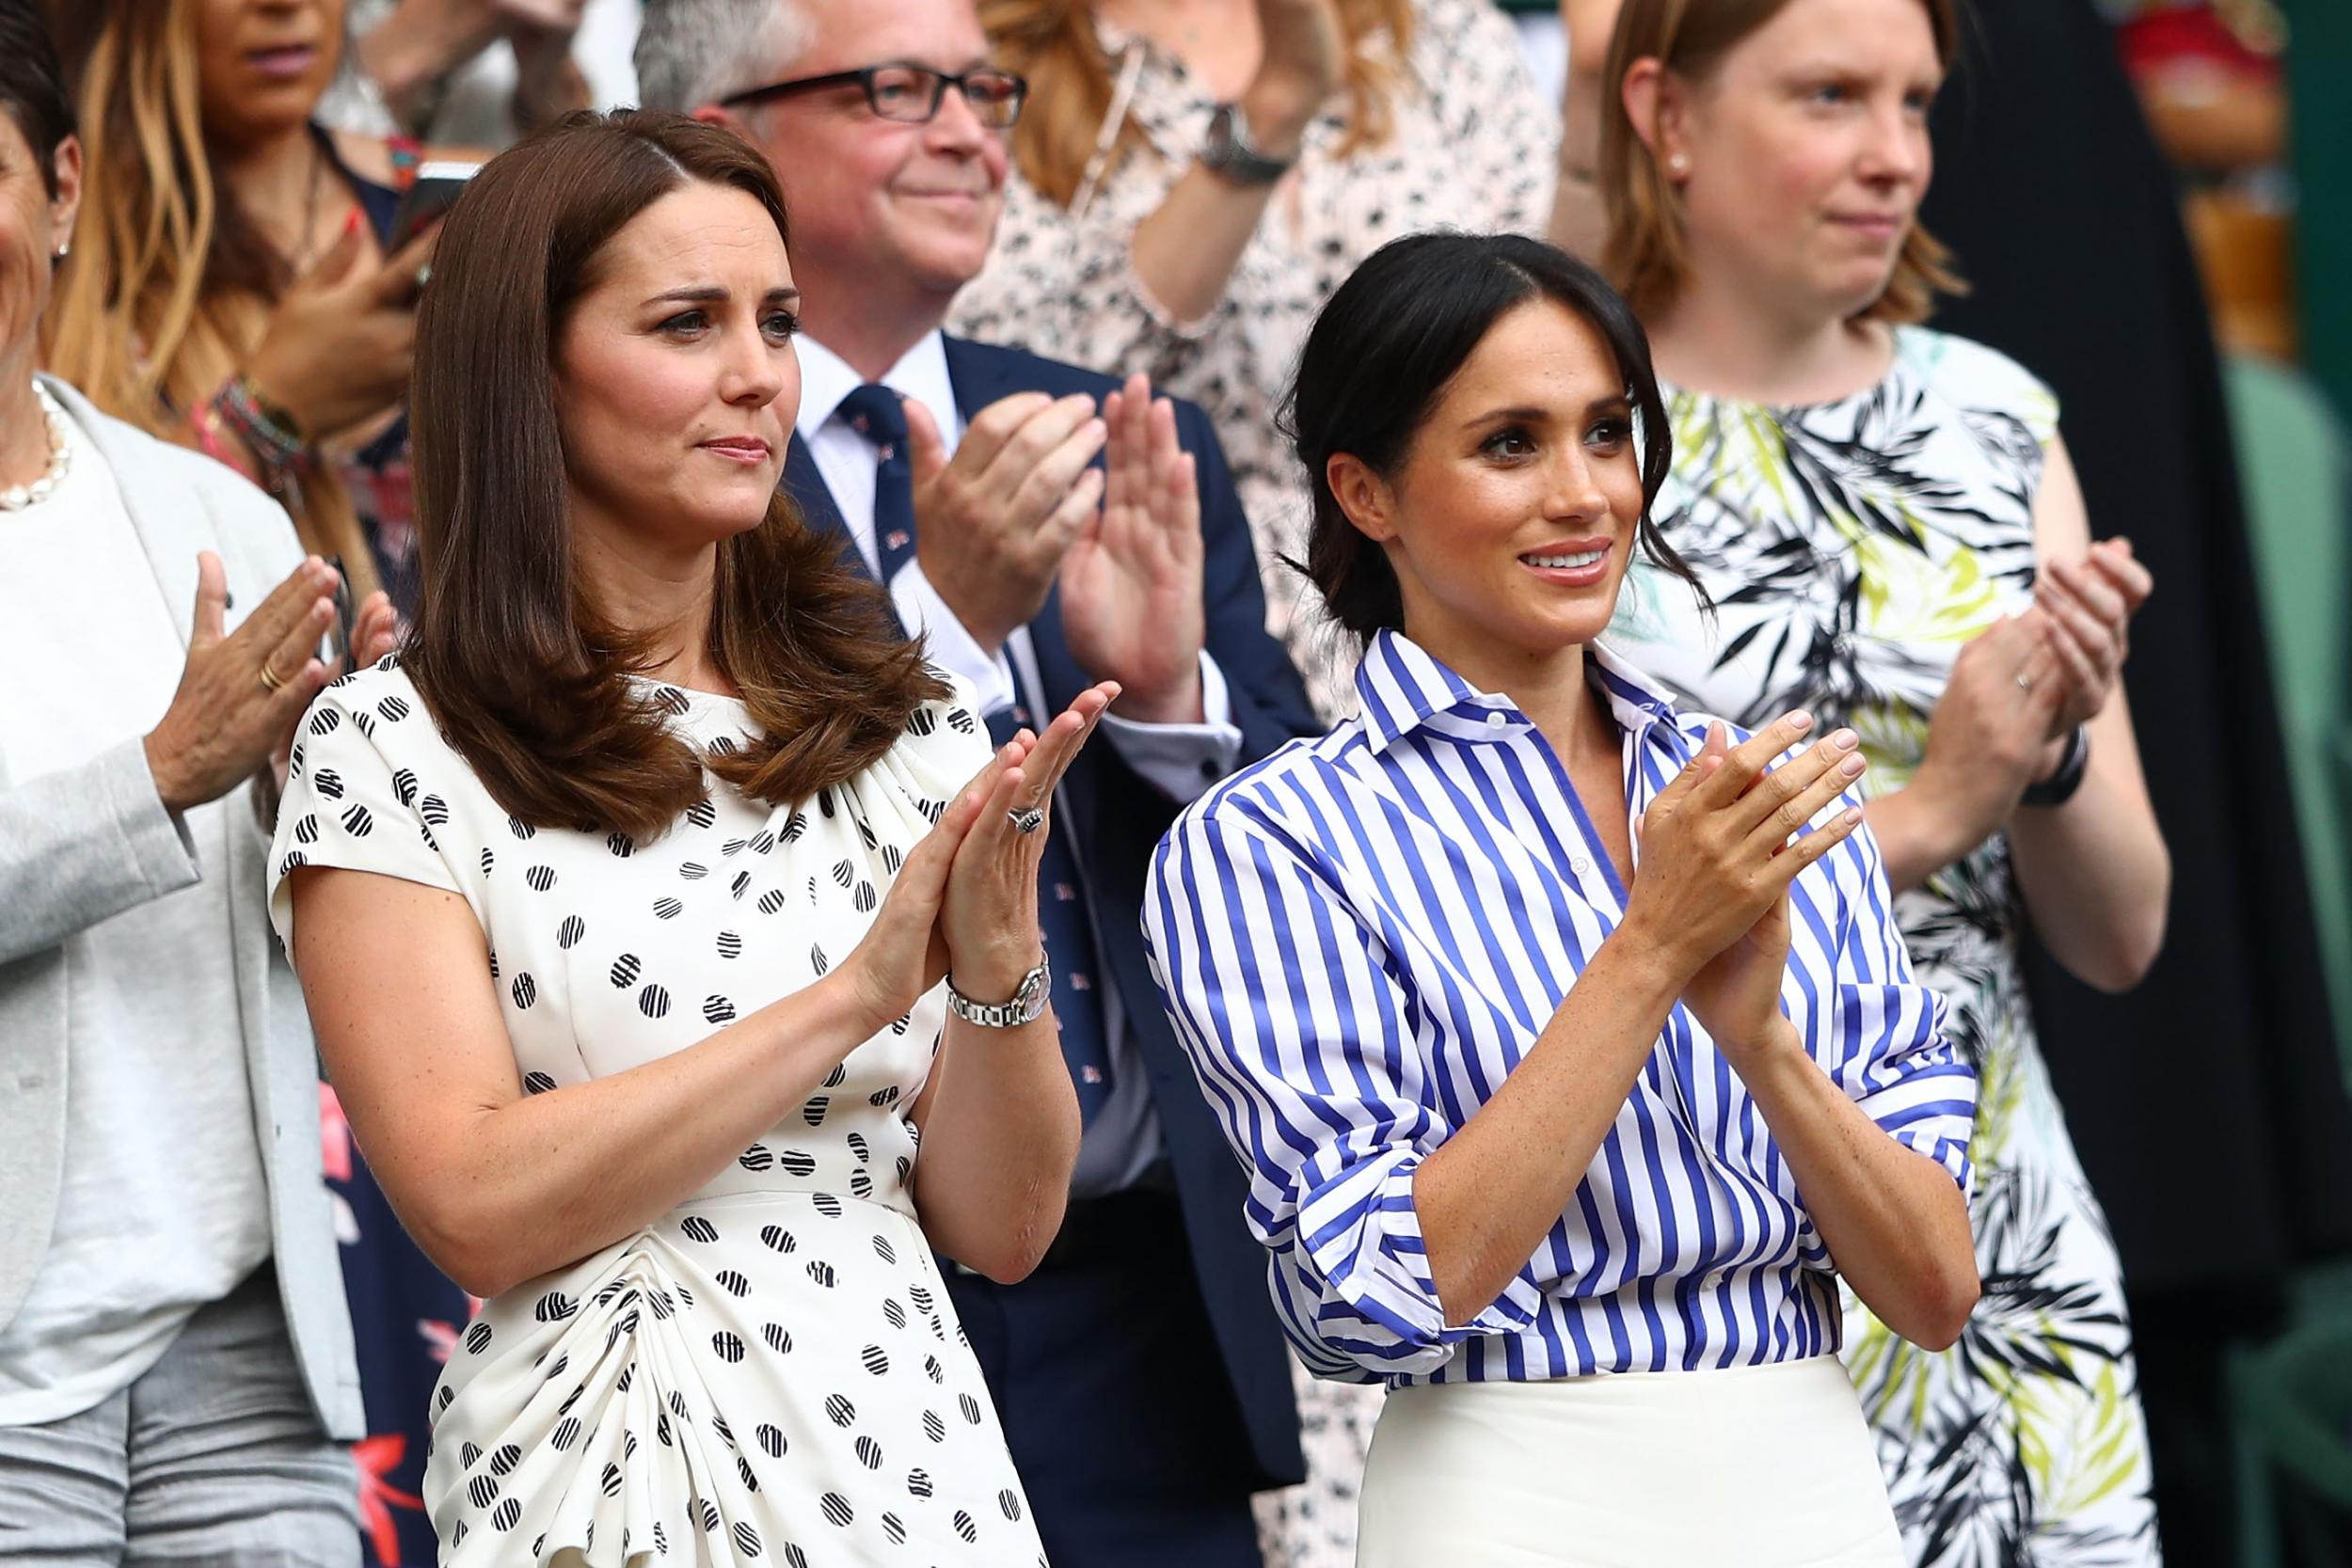 The Duchess of Cambridge and the Duchess of Sussex attending the Women's Singles Final at Wimbledon 2018, watching Serena Williams play Angelique Kerber